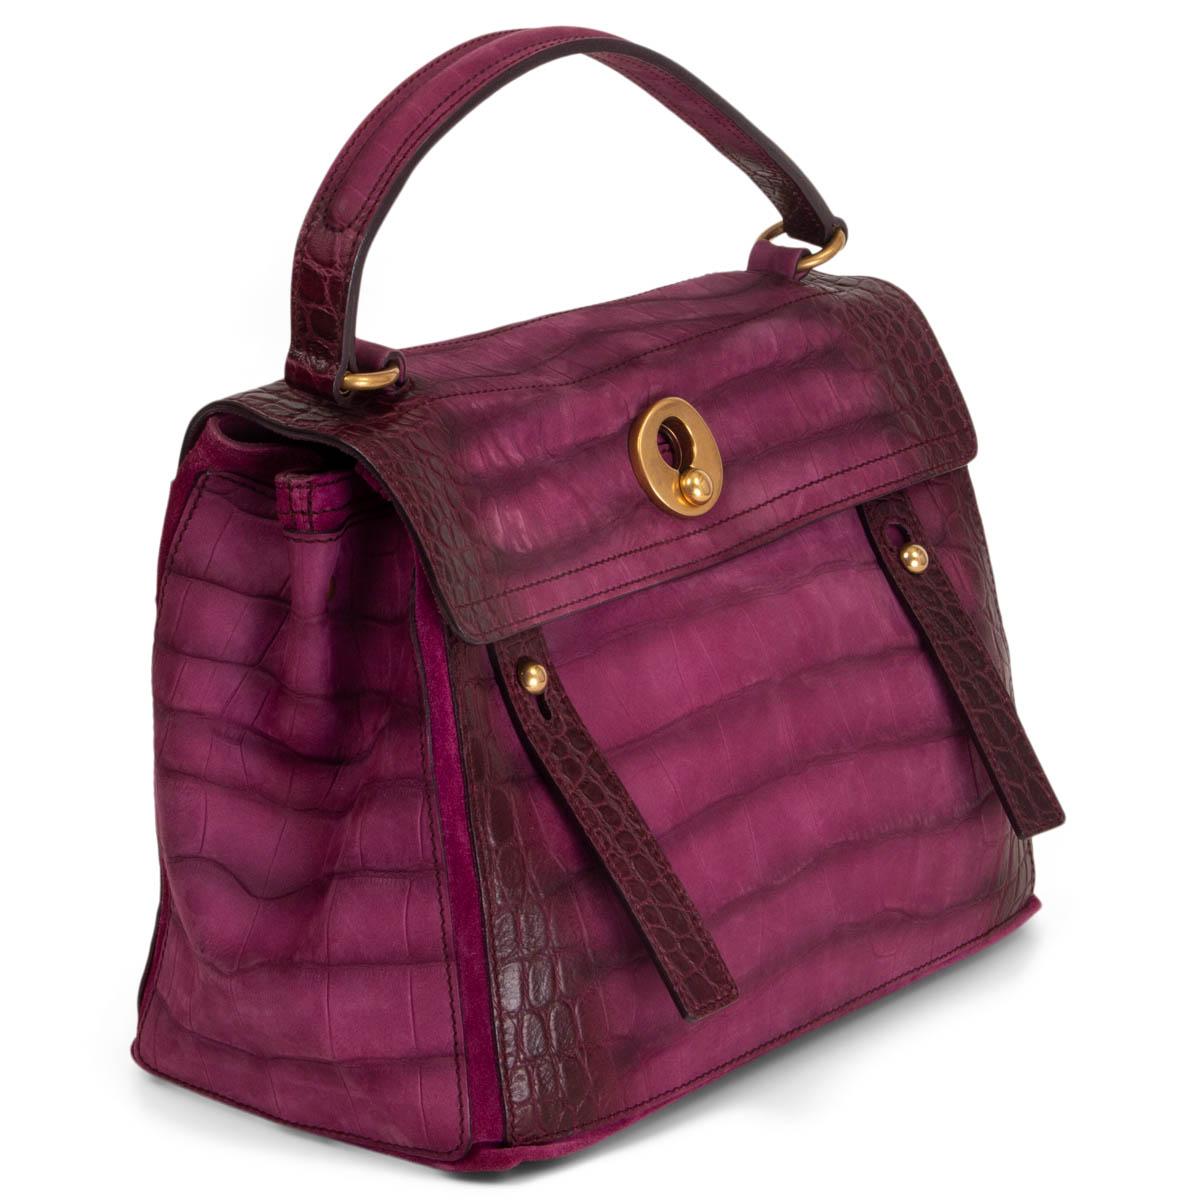 100% authentic Yves Saint Laurent Muse Two Medium handbag in magenta and burgundy croc embossed nubuck and details in suede. Opens with two straps and is lined in magenta suede with one big zipper pocket in the middle. Has an extra pocket on the